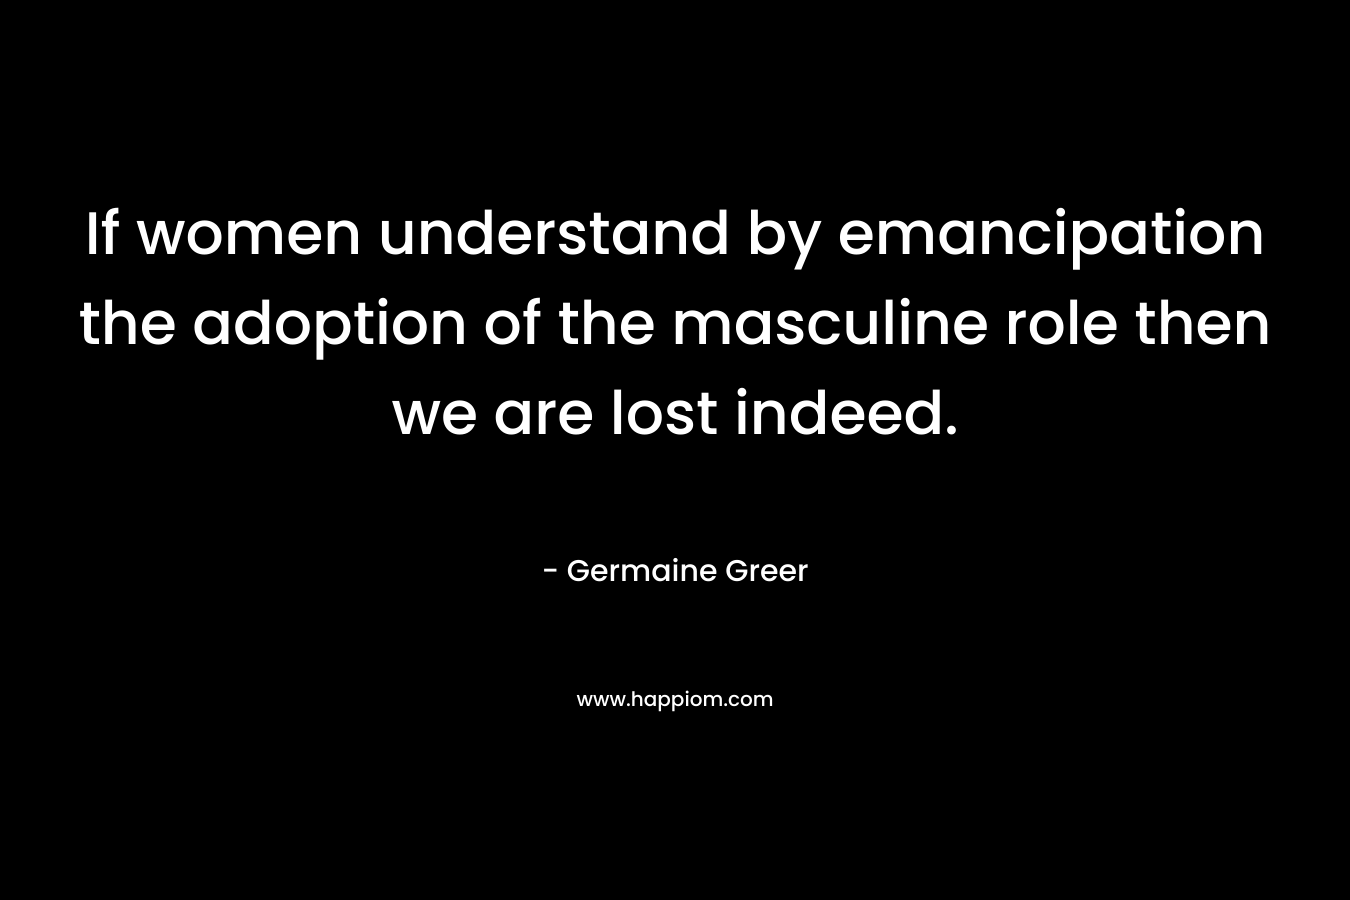 If women understand by emancipation the adoption of the masculine role then we are lost indeed.